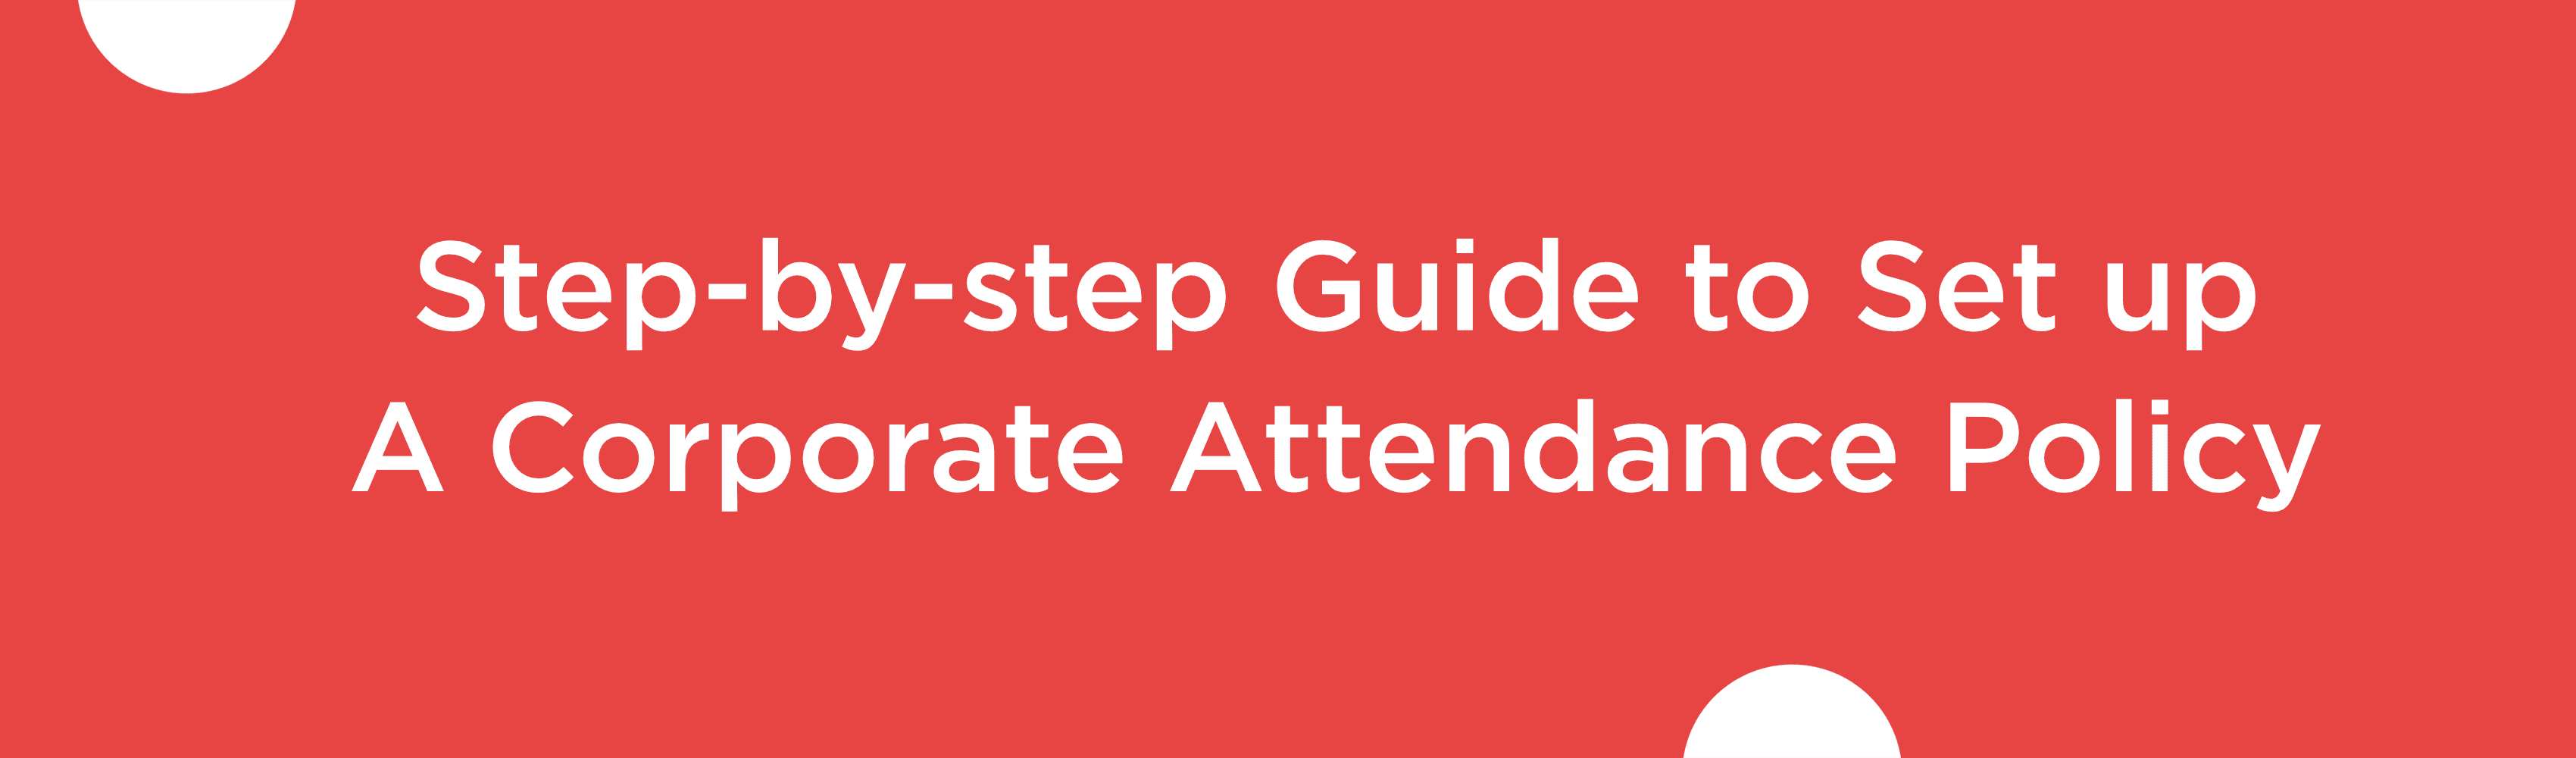 Step-by-step Guide to Set up A Corporate Attendance Policy